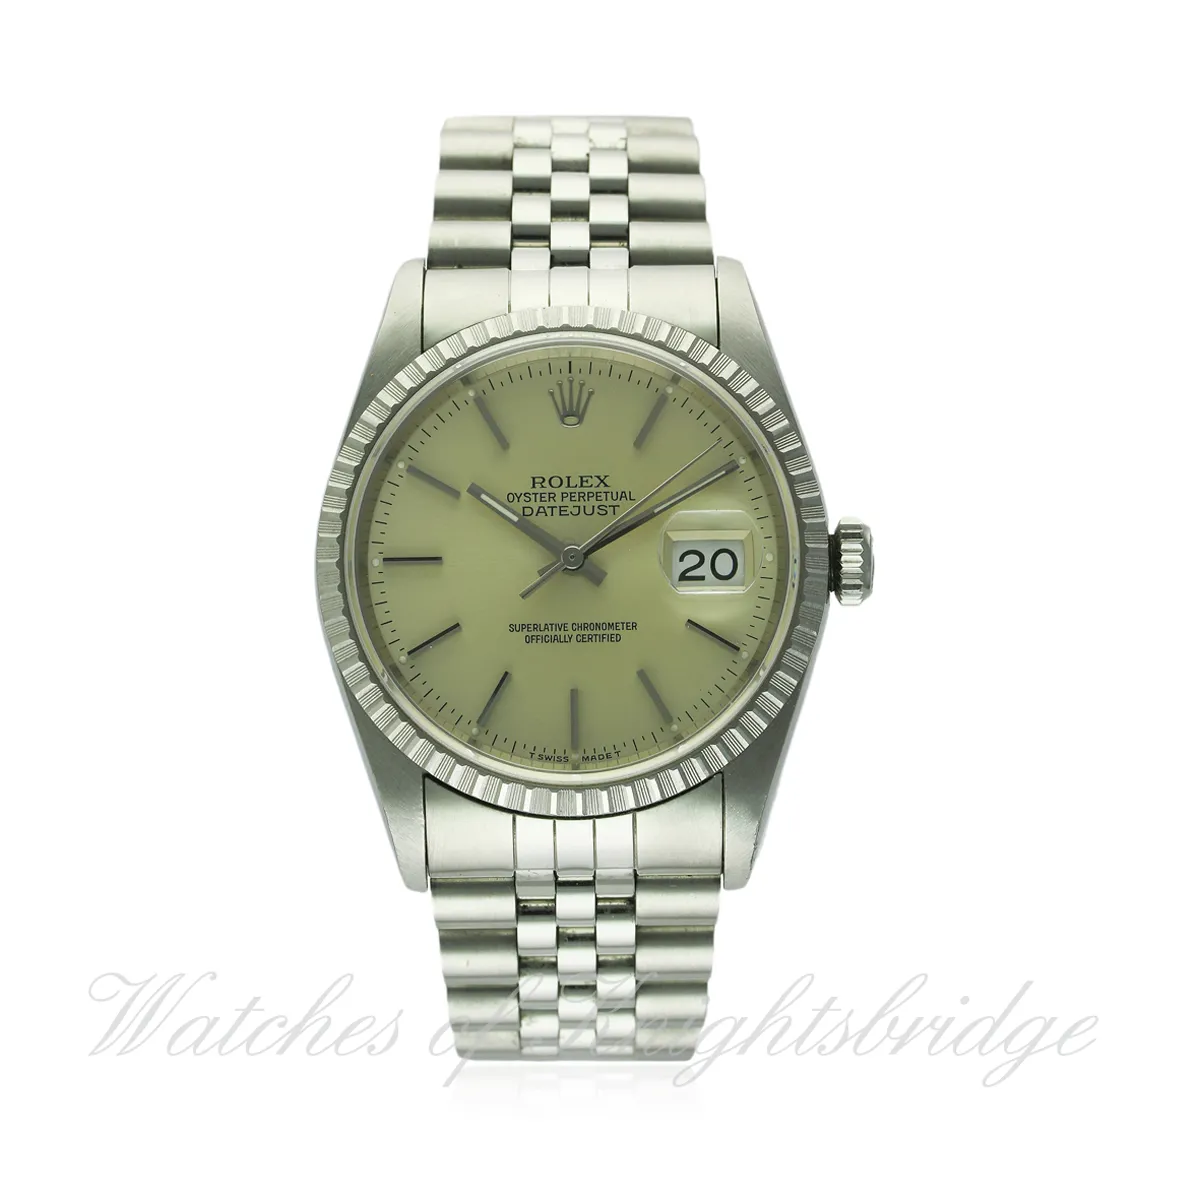 Rolex Datejust 36 16220 36mm Stainless steel Silvered